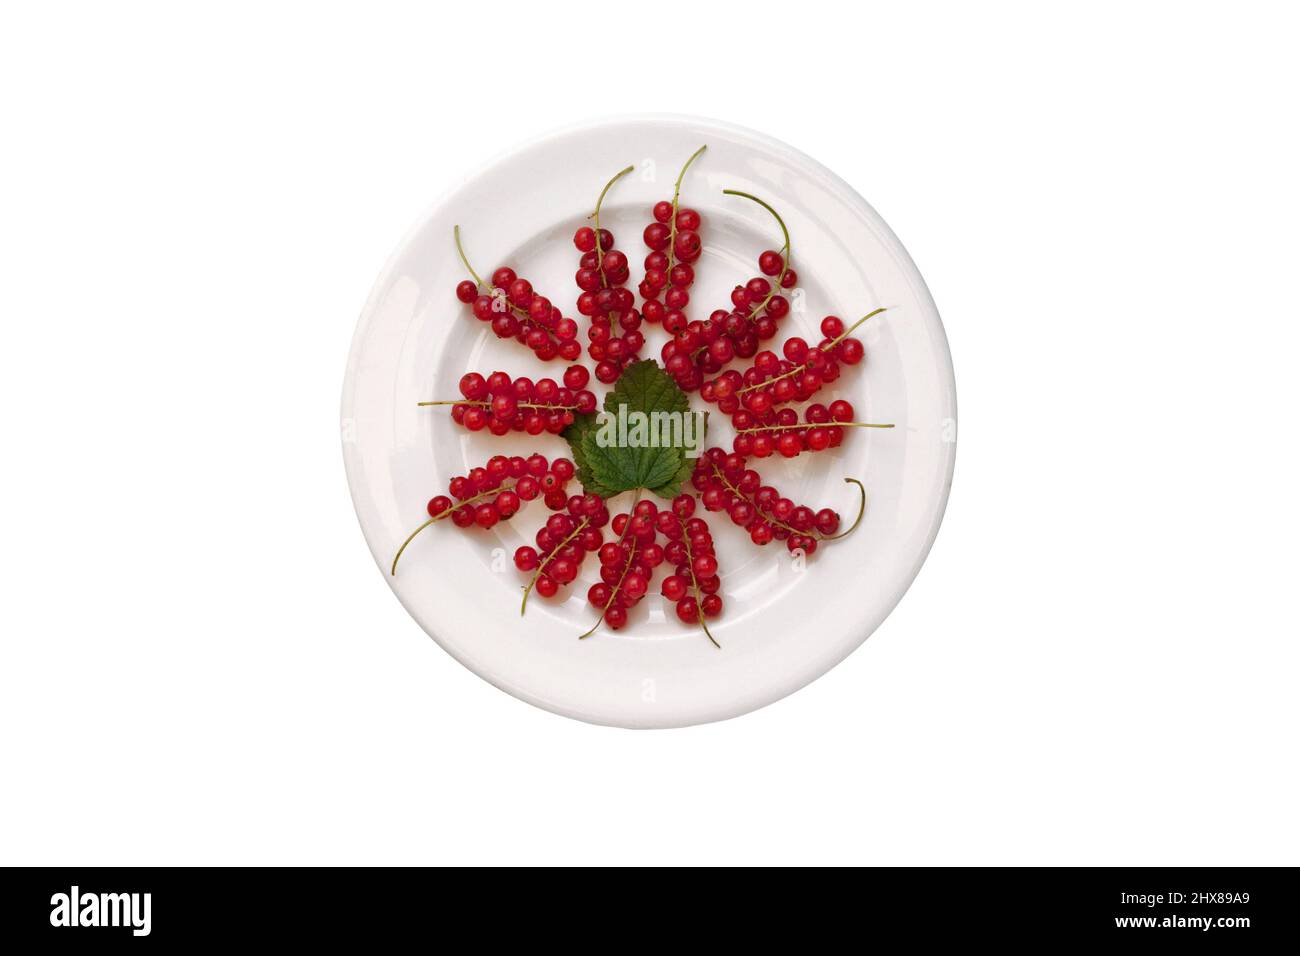 Redcurrants on a plate Stock Photo